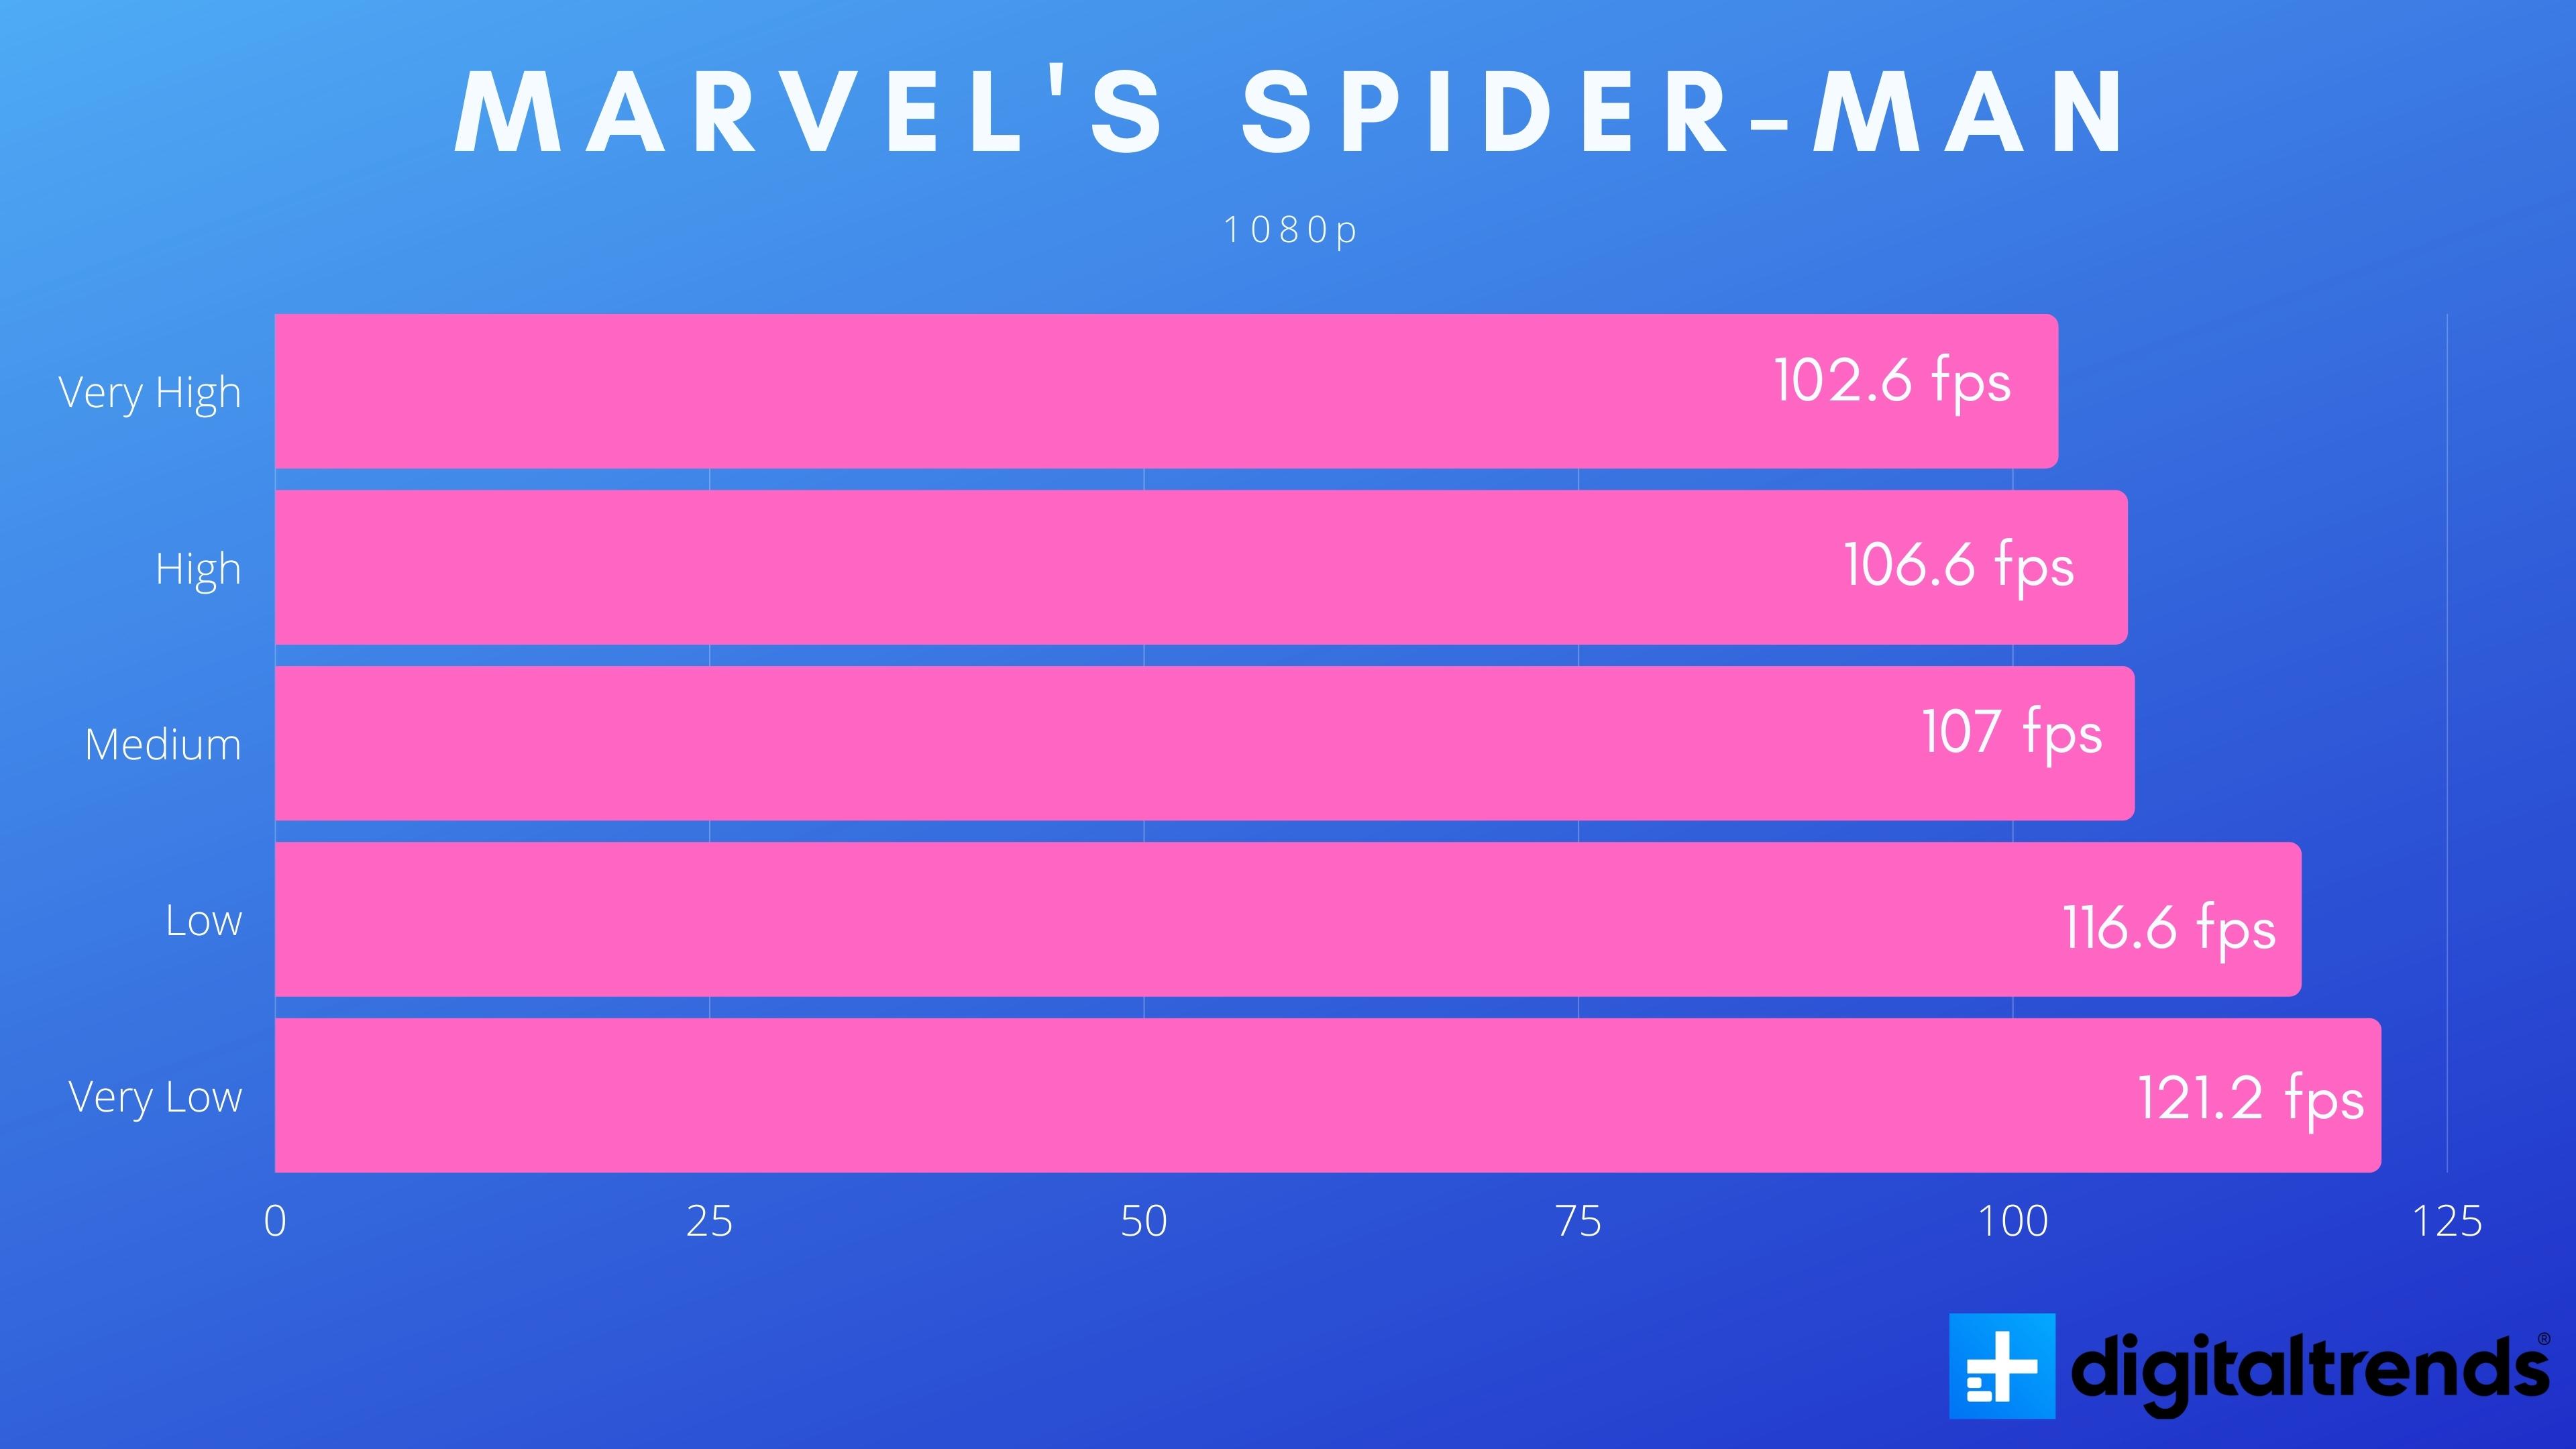 1080p gaming performance in Marvel's Spider-Man.